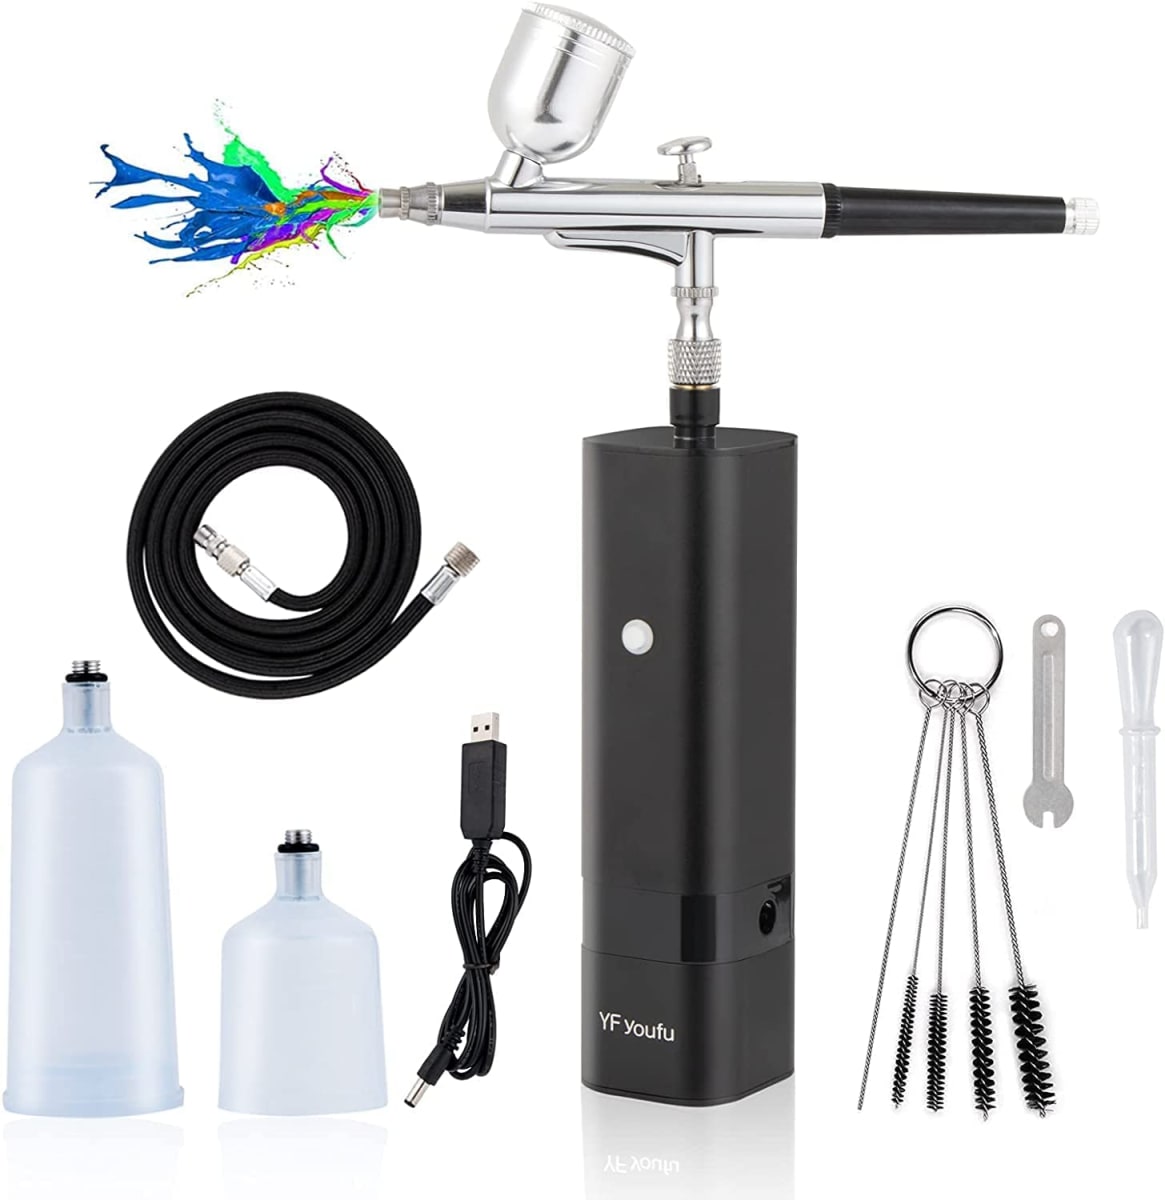 Cordless Airbrush Kit with Compressor